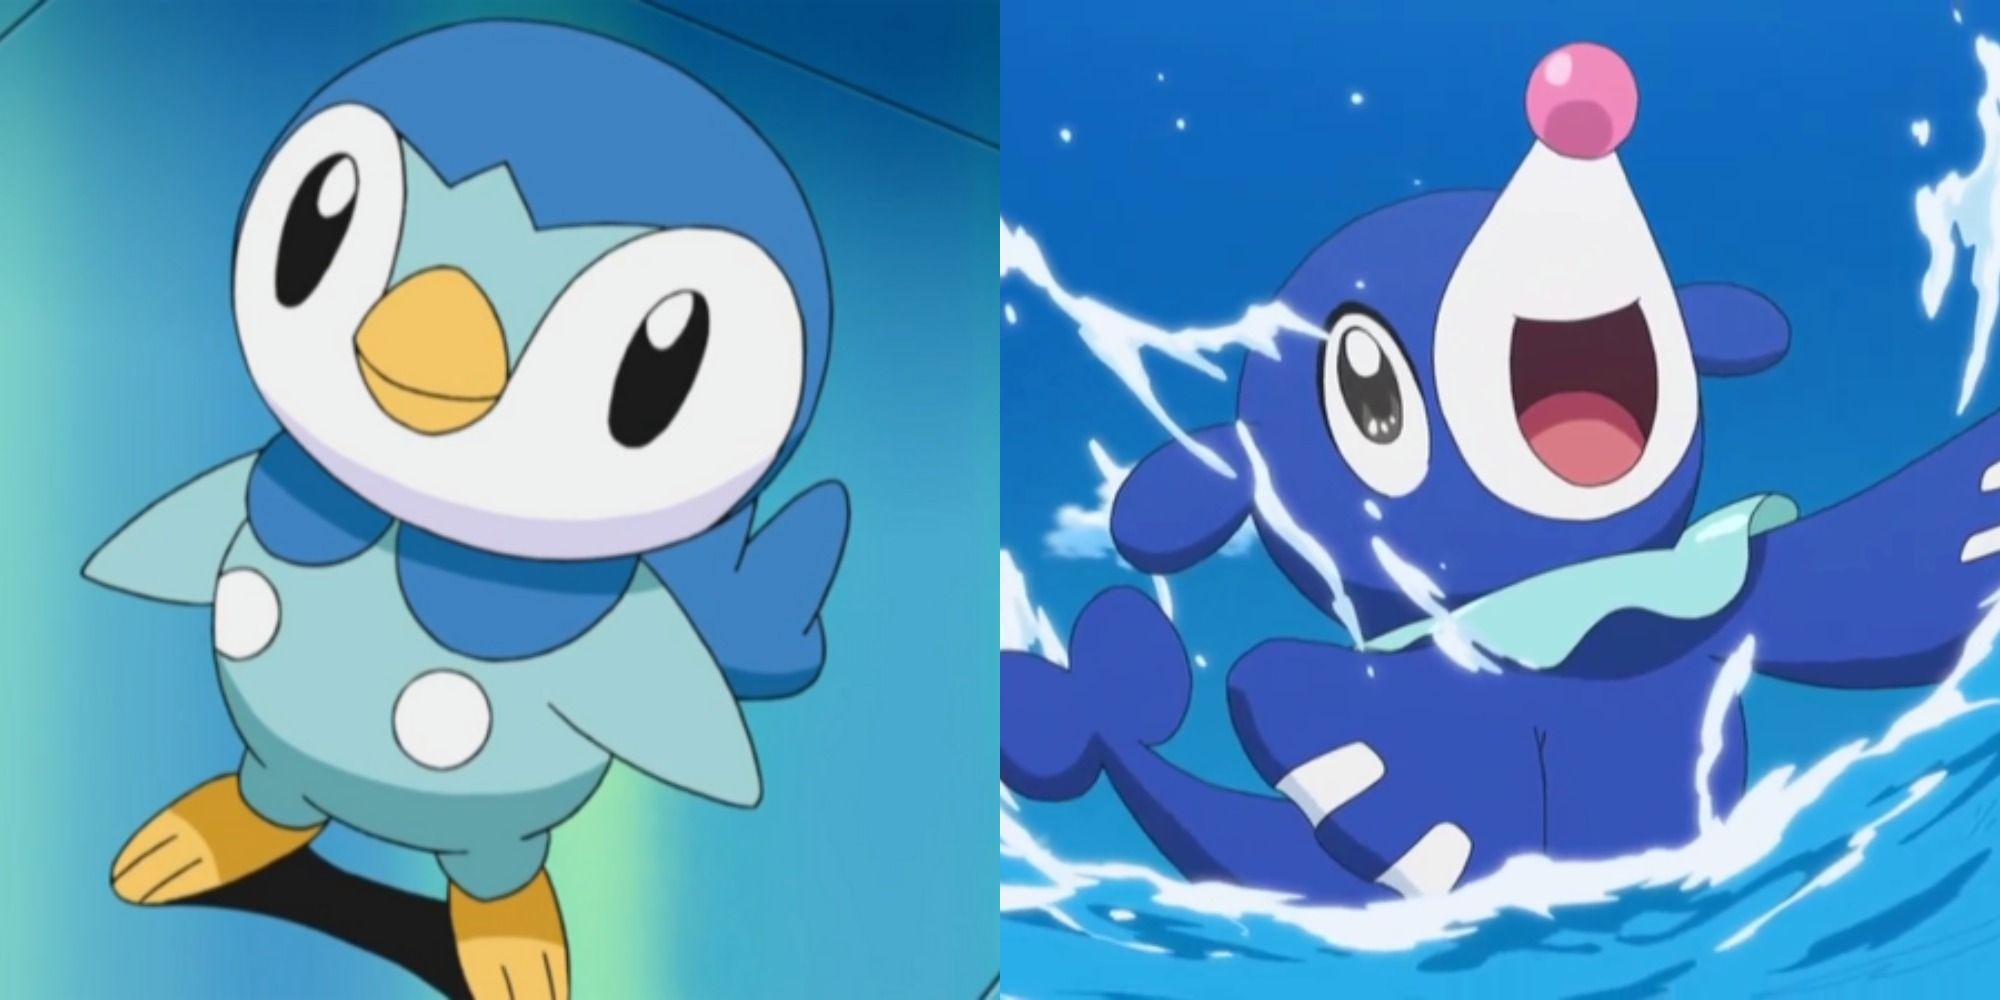 Split image showing Piplup and Popplio in the Pokémon anime